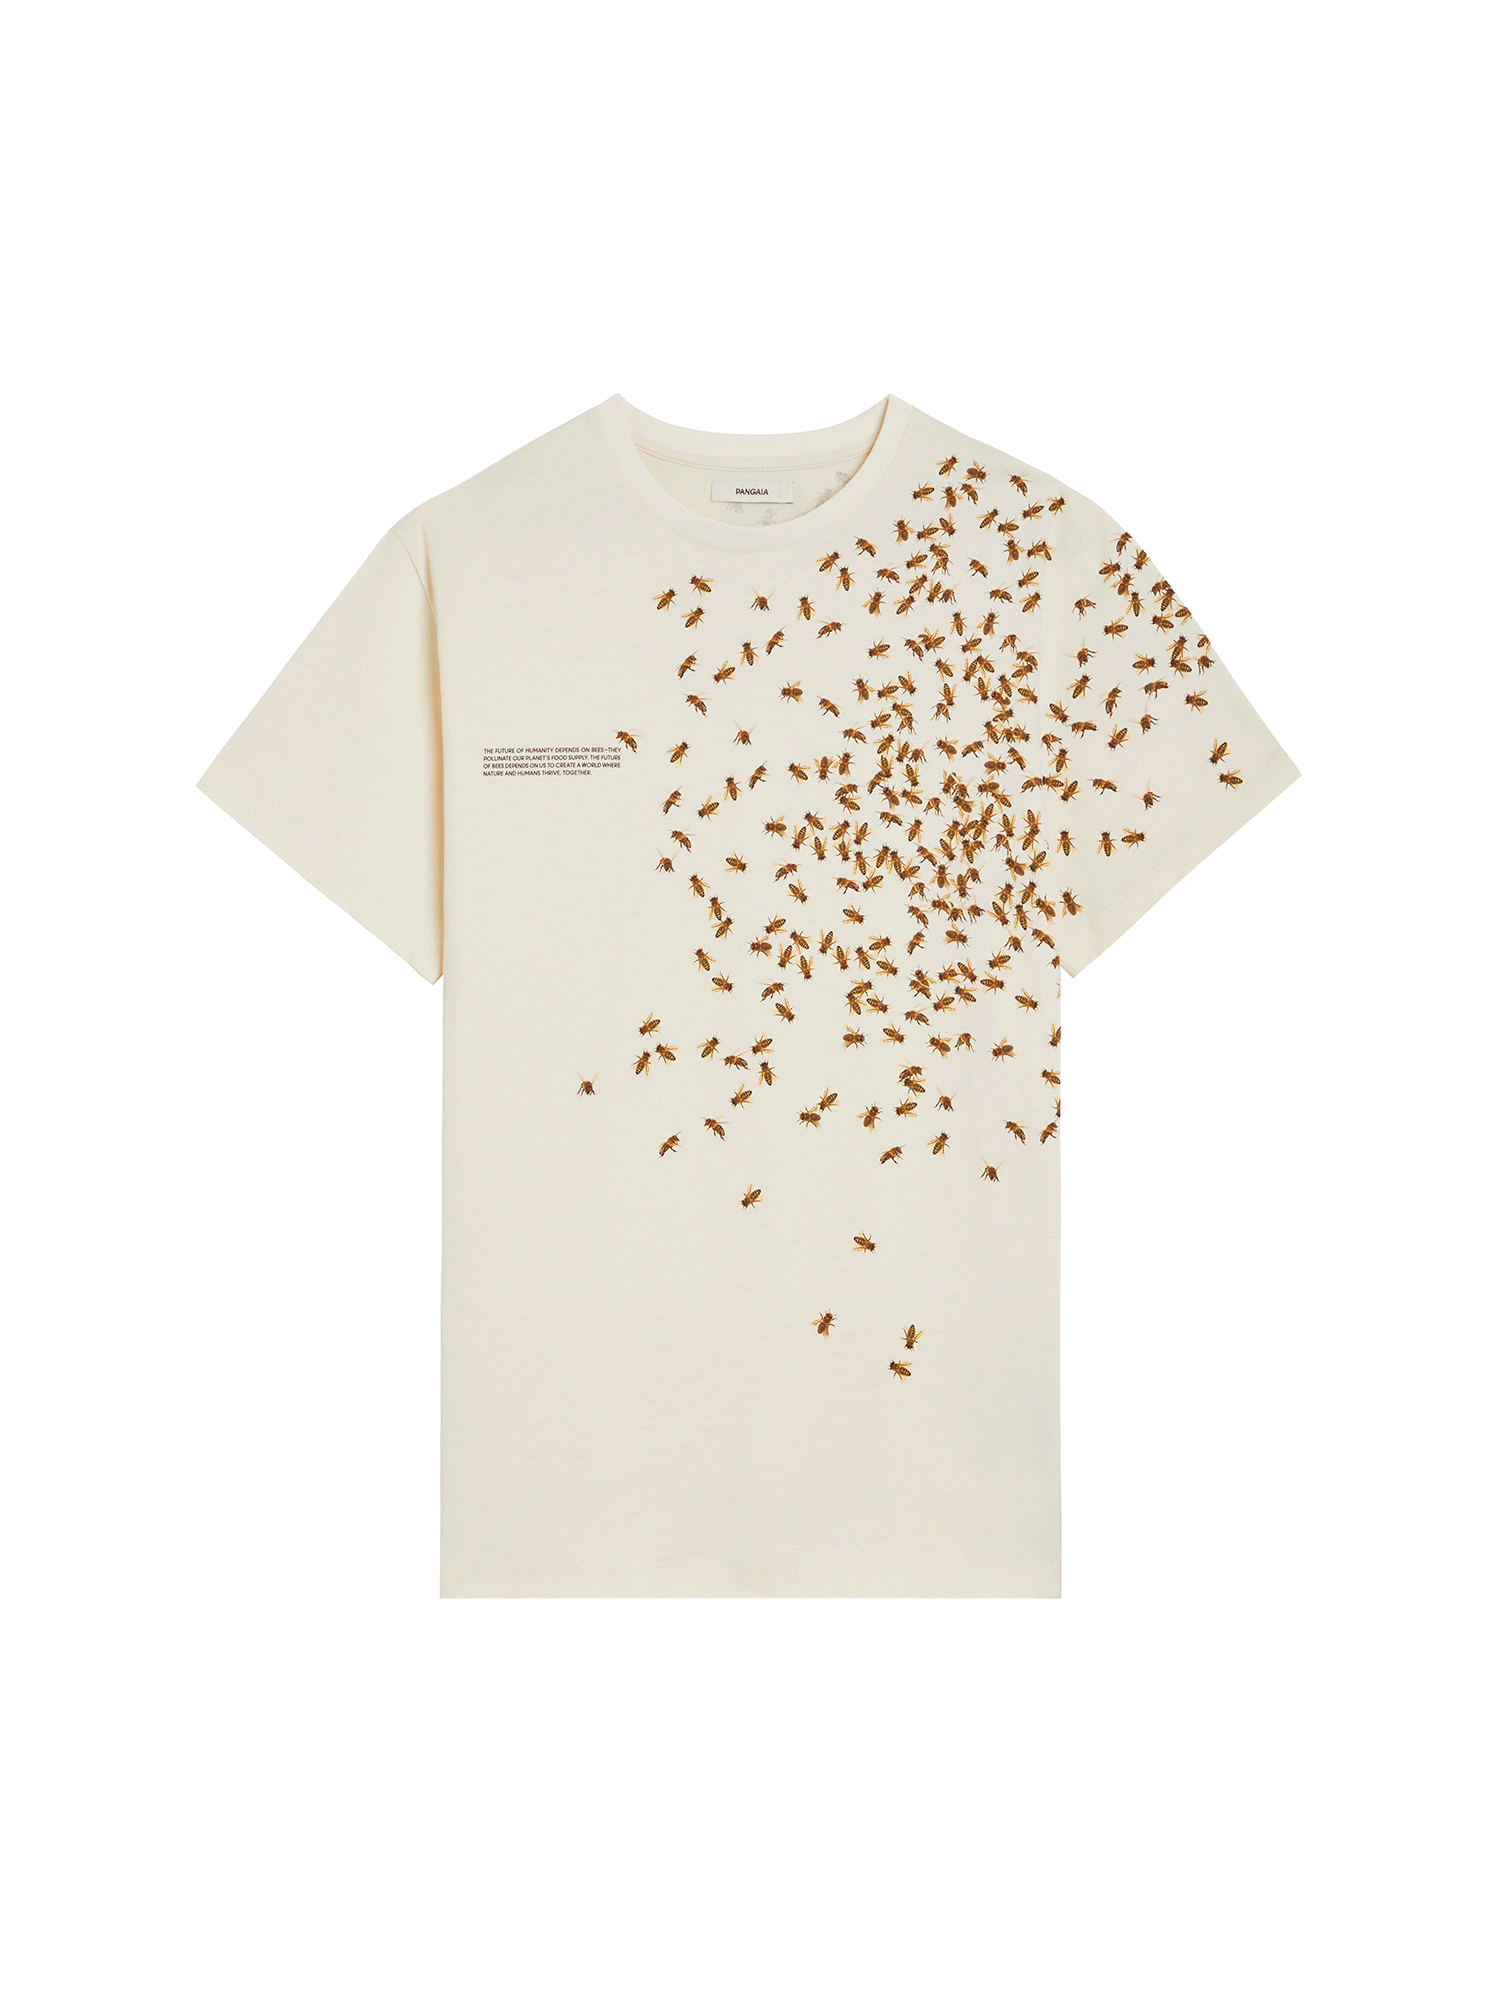 Shop Small Support Local Organic Cotton T-shirt – Good For Sunday